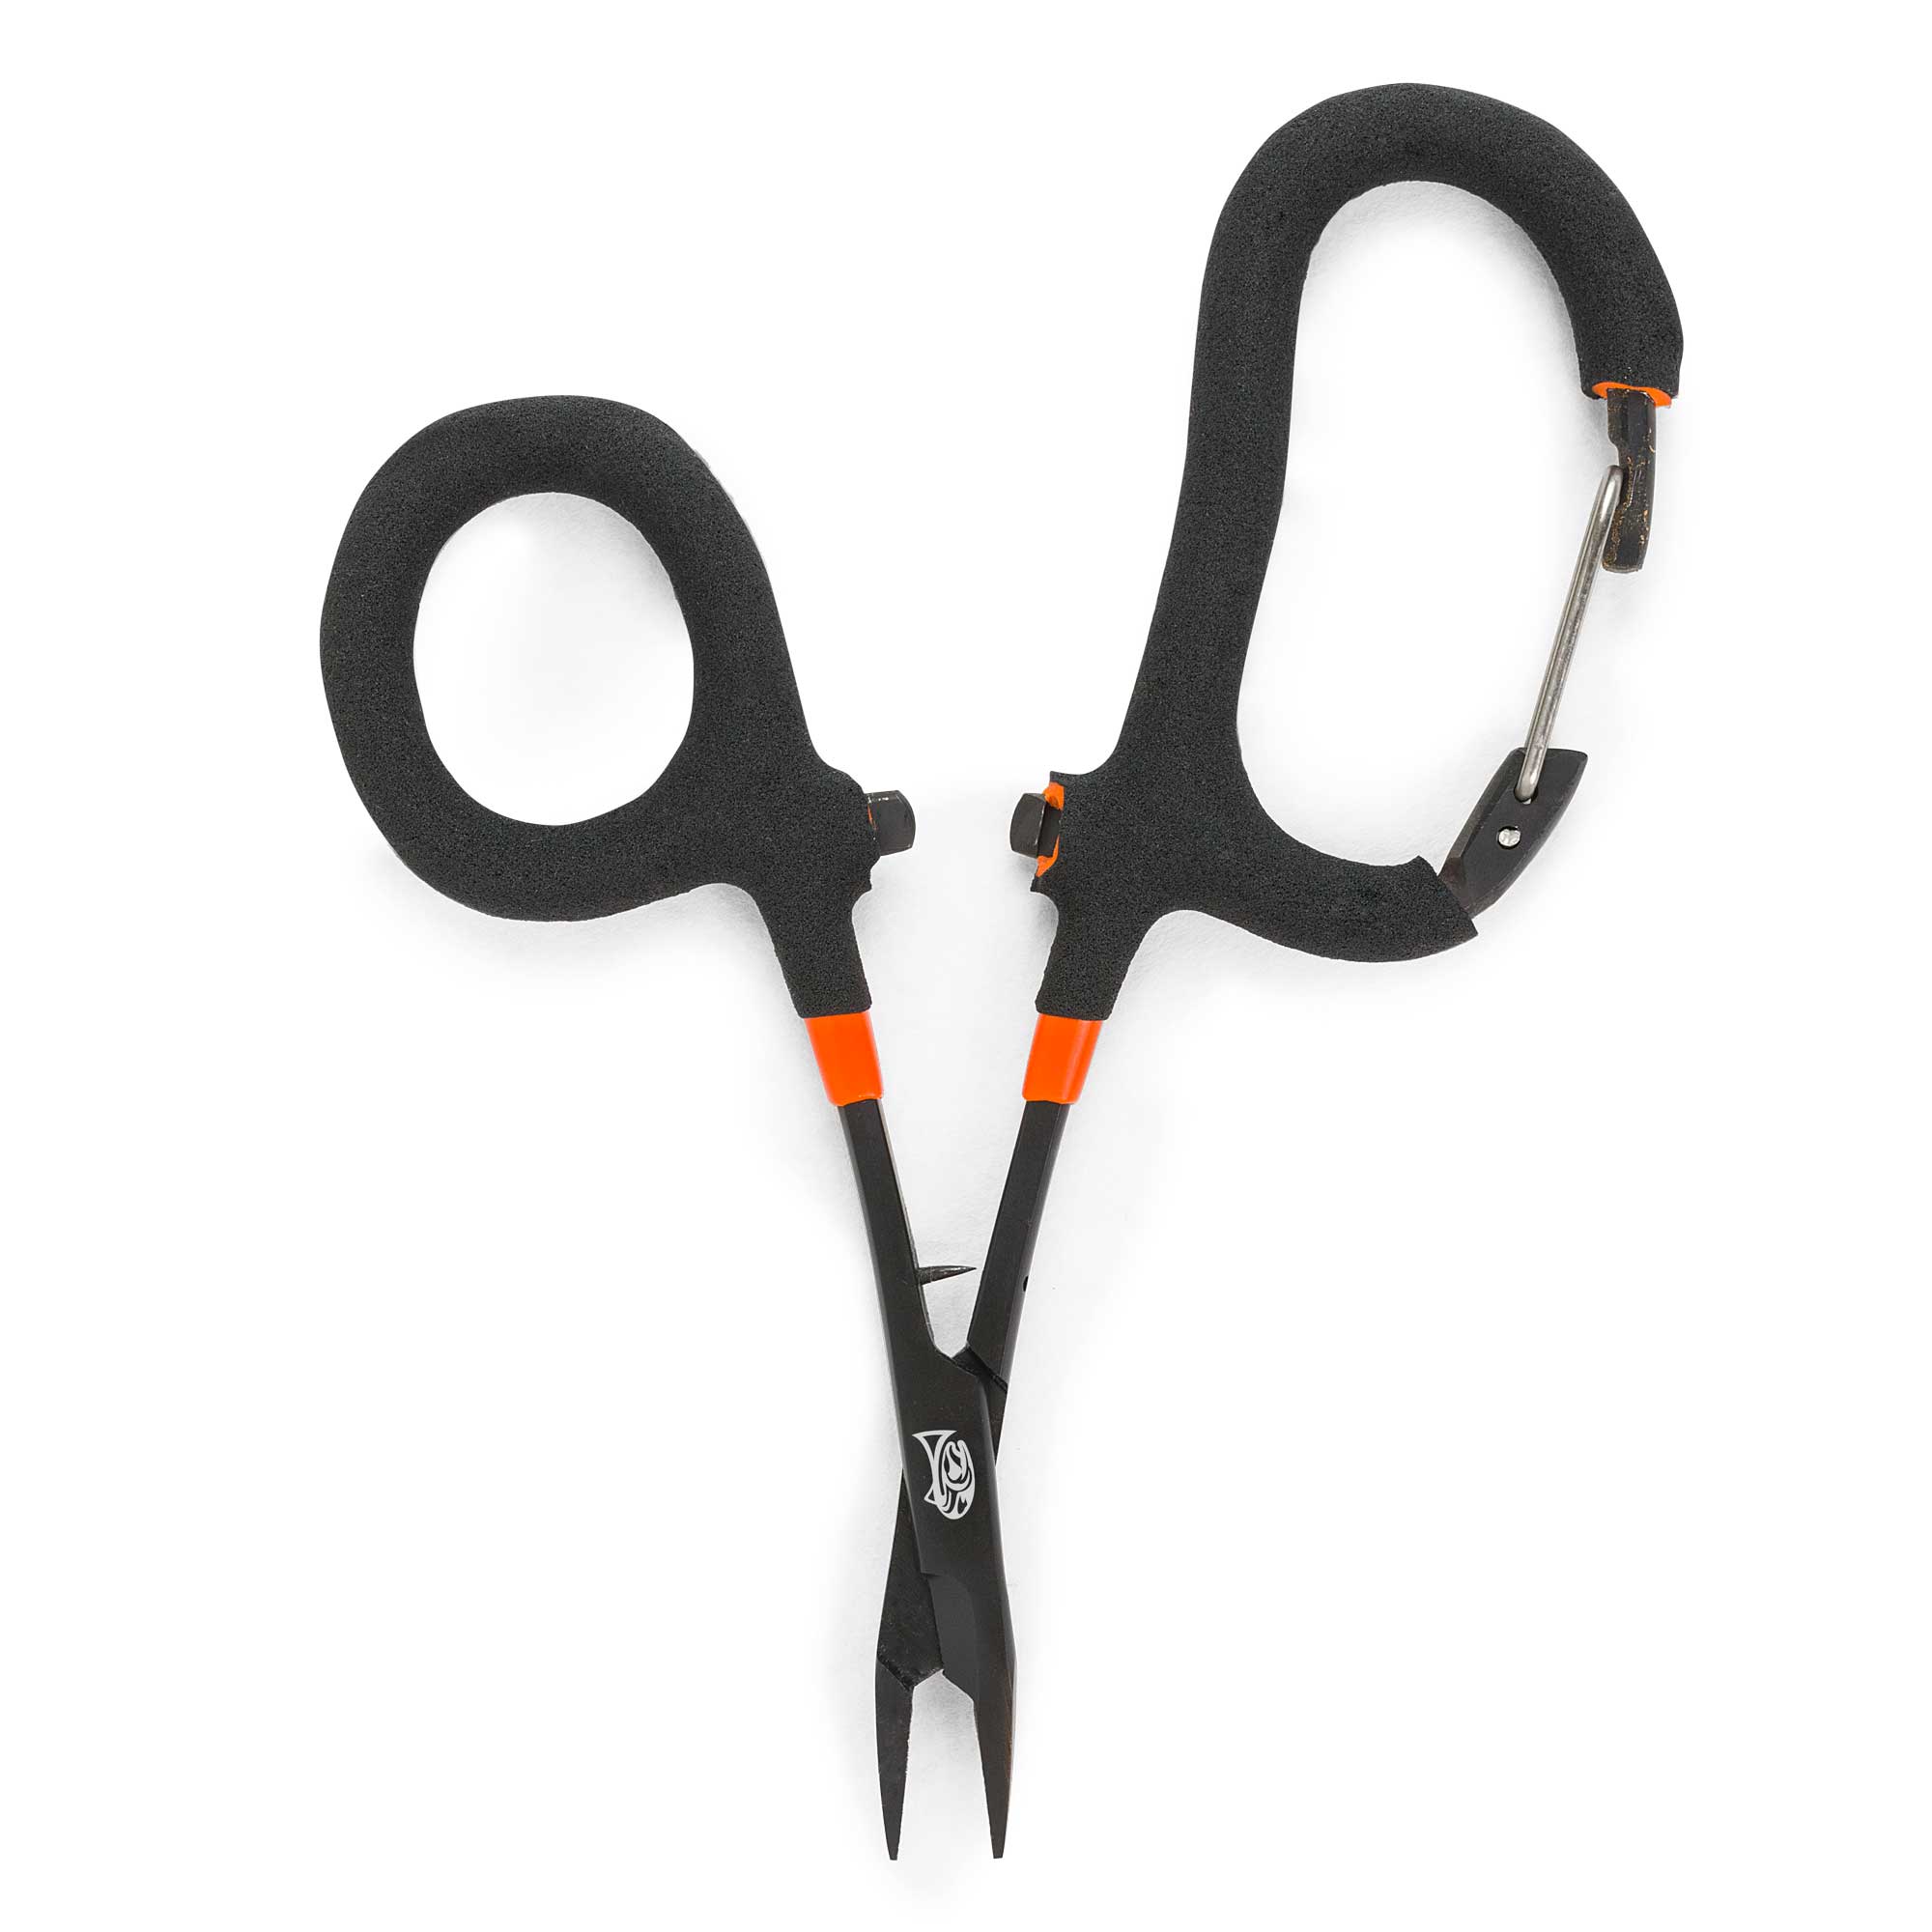 Loon Rogue Hook Removal Forceps